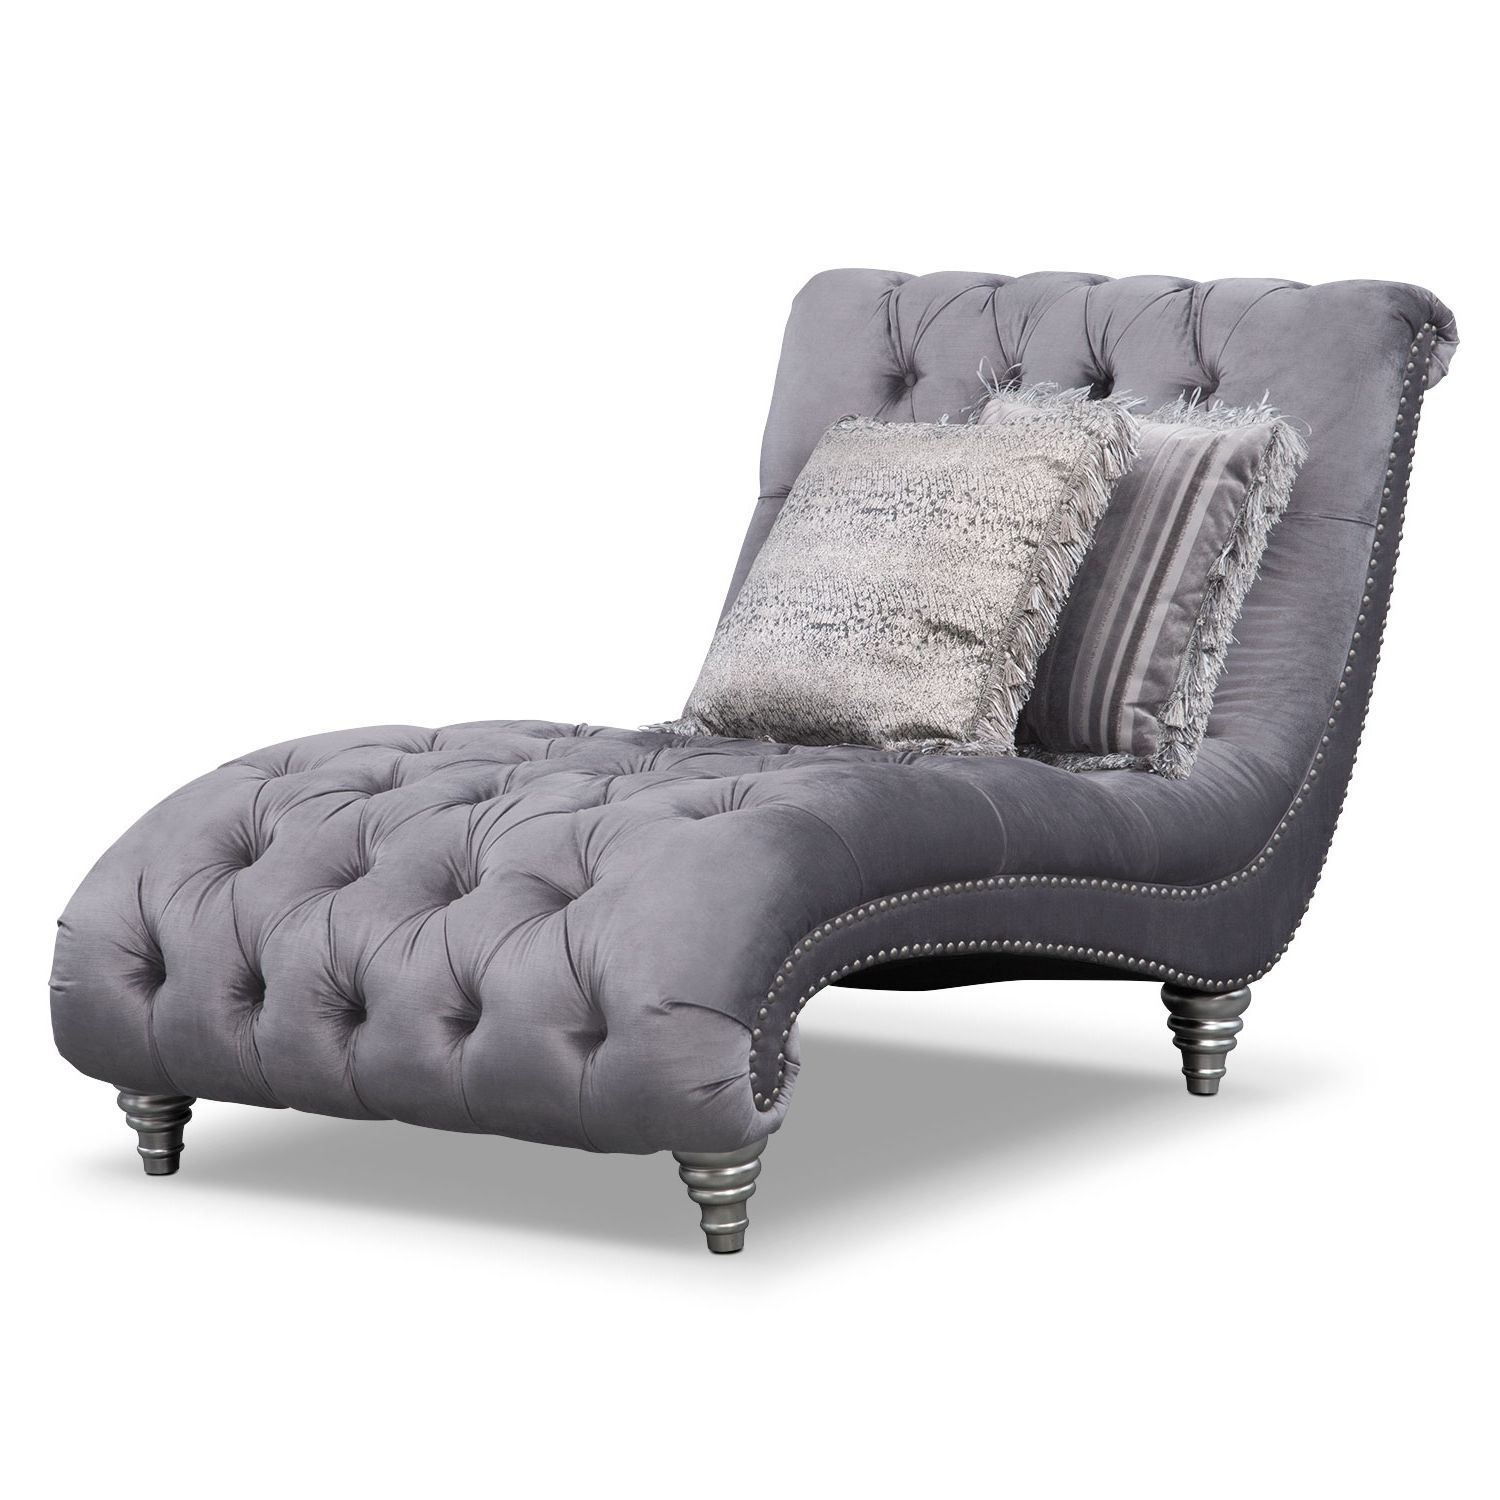 Recent Elegant Chaise Lounge Chairs Regarding Gray Chaise Lounge Chair • Lounge Chairs Ideas (View 12 of 15)